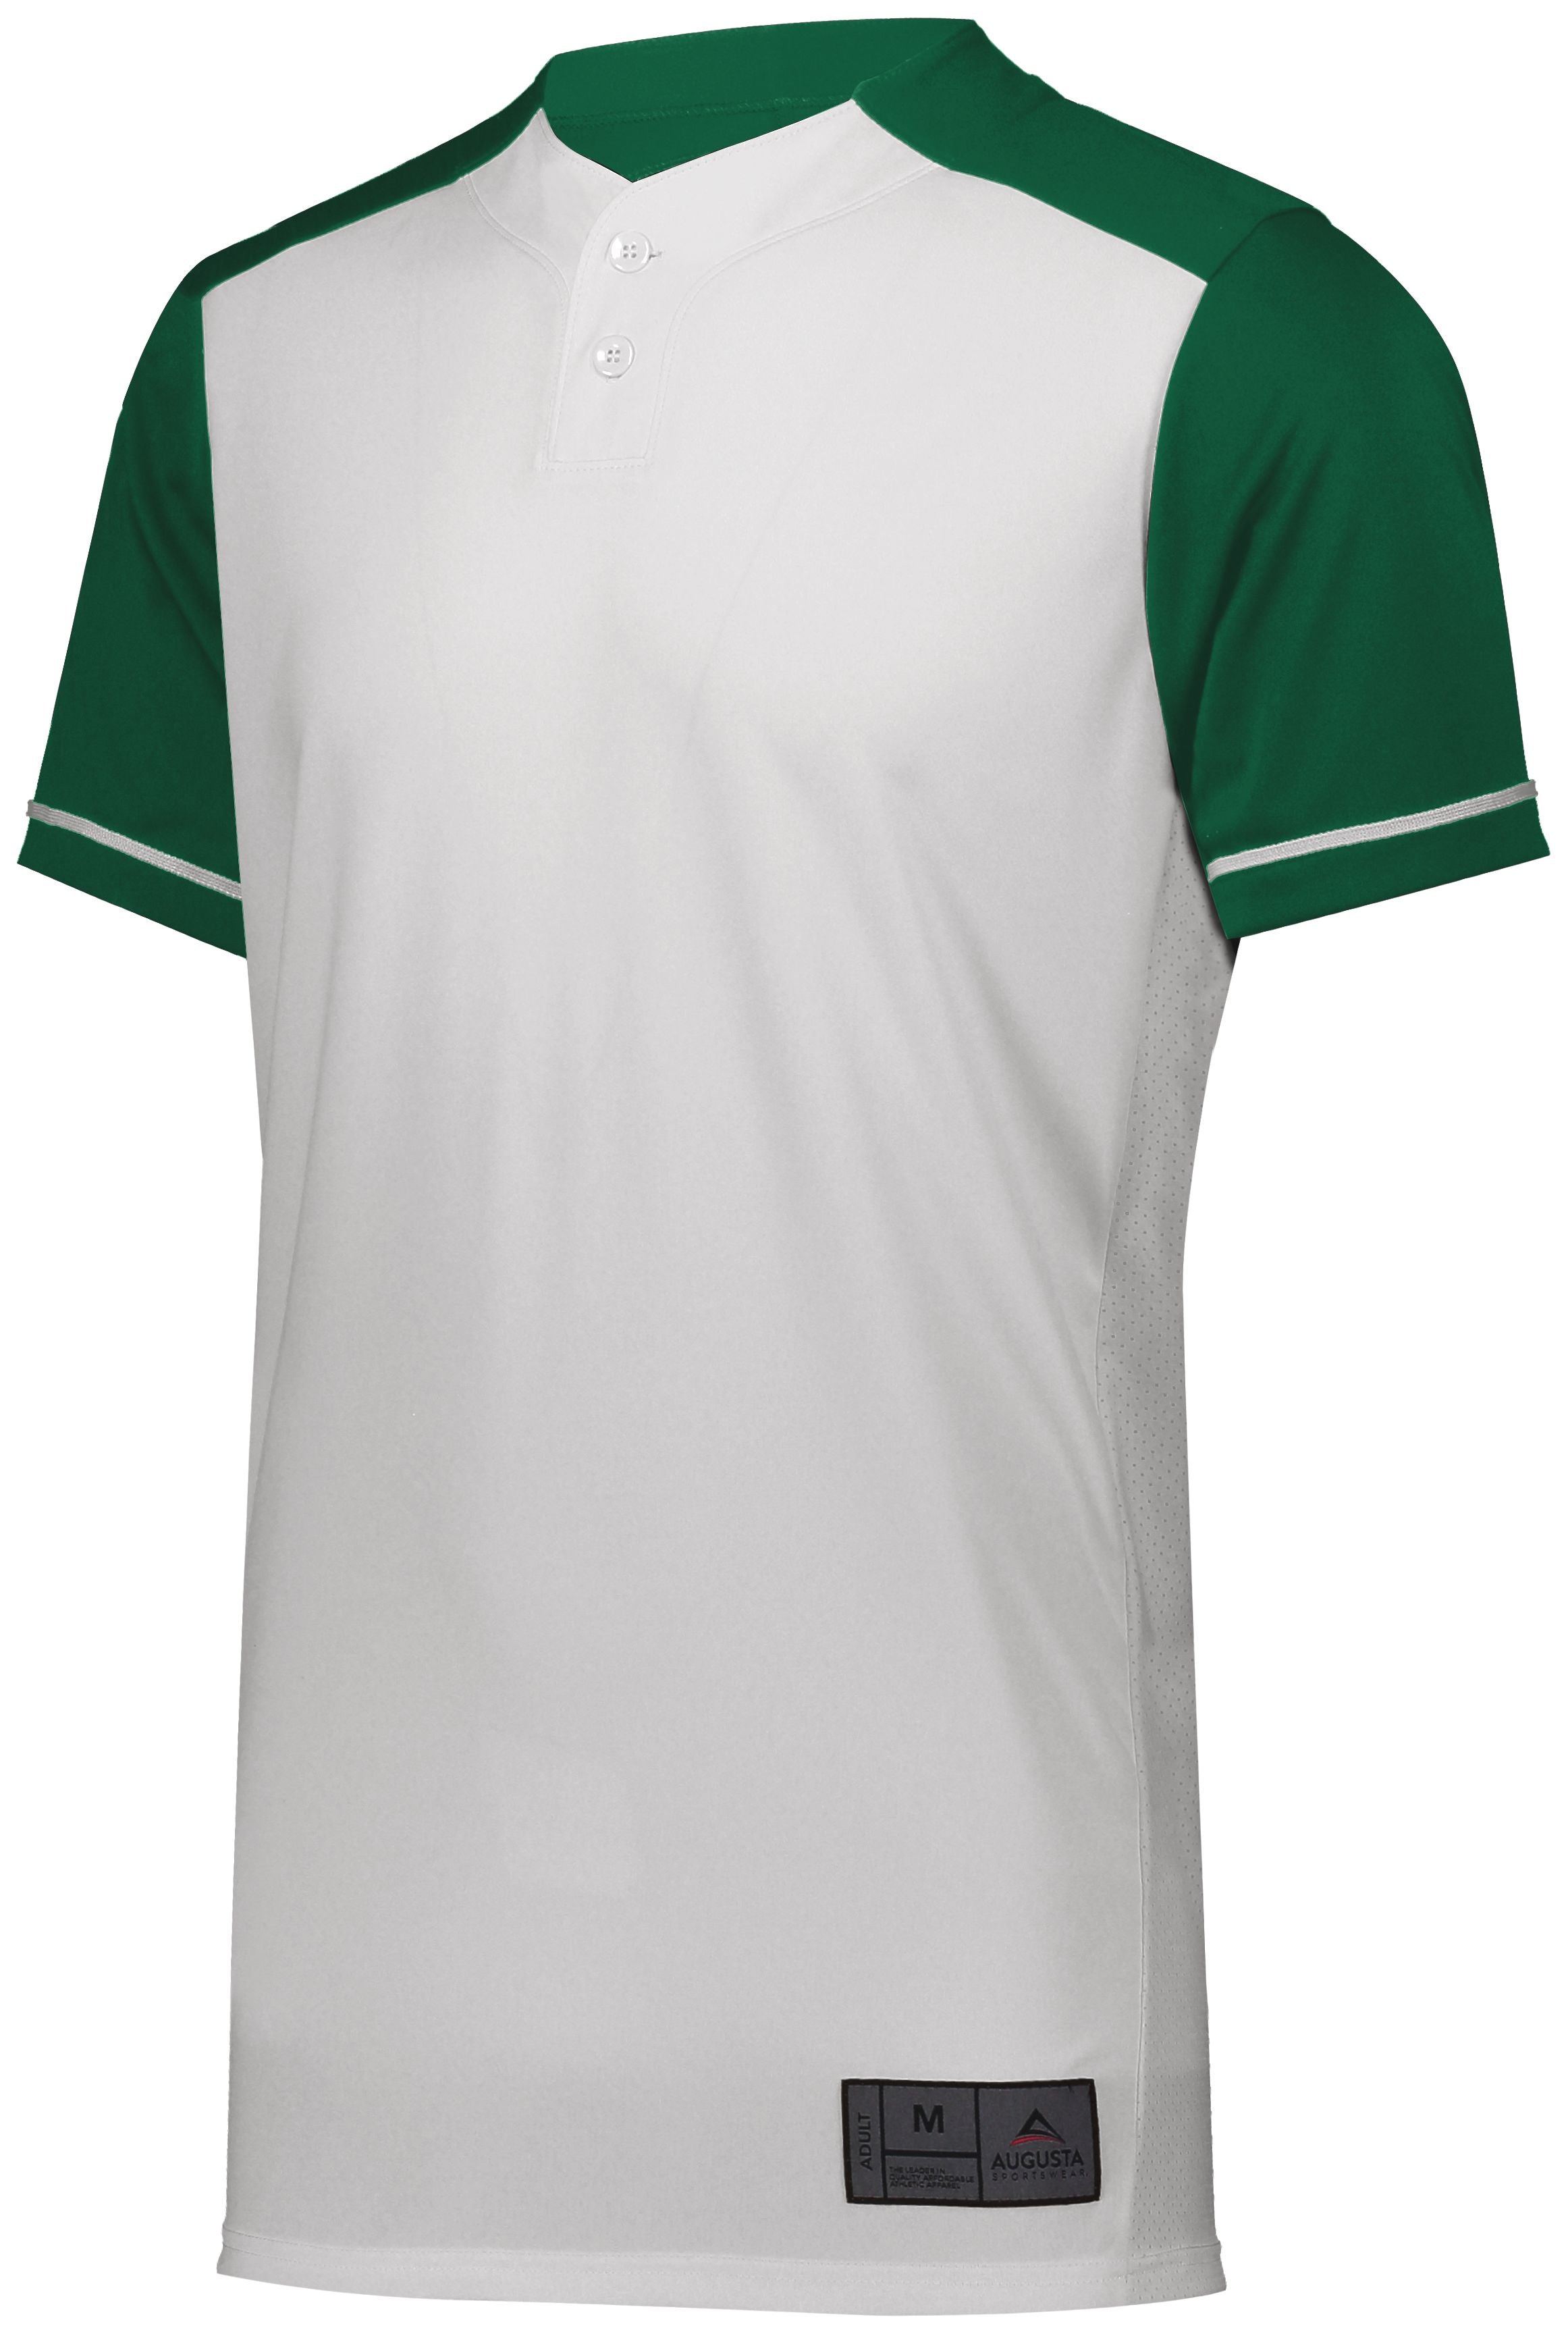 Augusta Sportswear Closer Jersey in White/Dark Green  -Part of the Adult, Adult-Jersey, Augusta-Products, Baseball, Shirts, All-Sports, All-Sports-1 product lines at KanaleyCreations.com